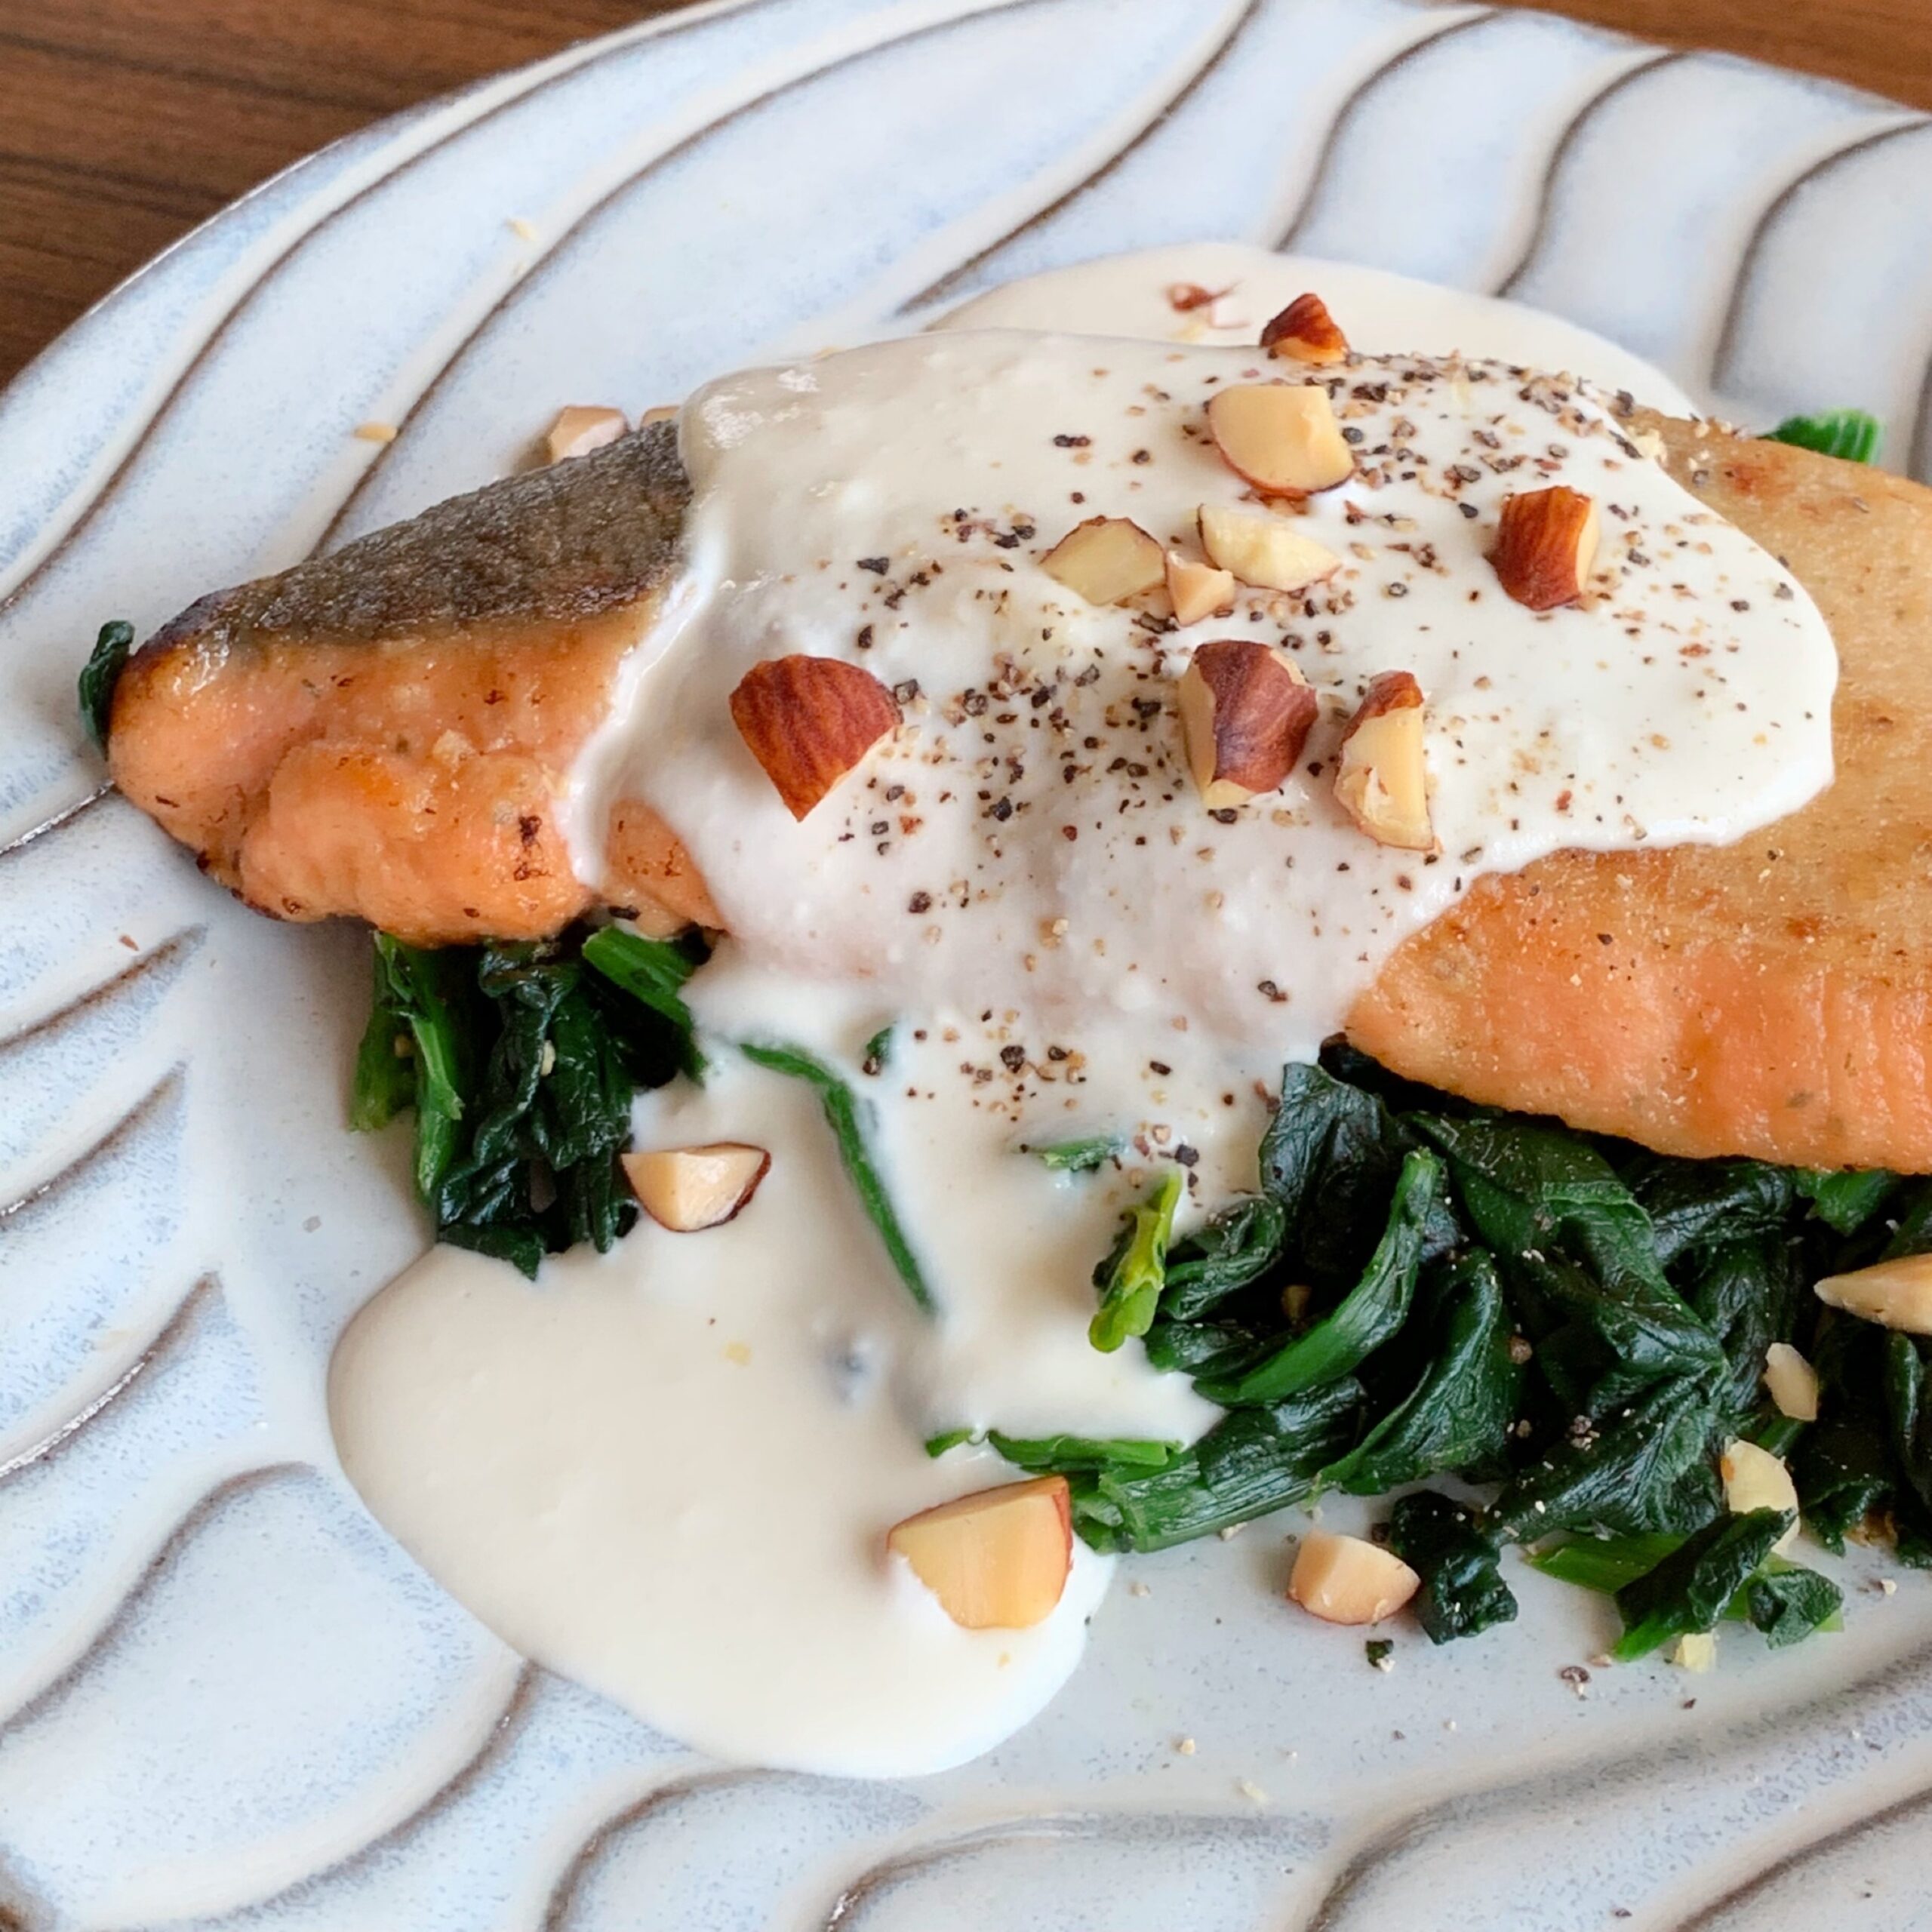 Salmon Meuniere, a classic fish dish, topped with a sauce made from cream cheese.